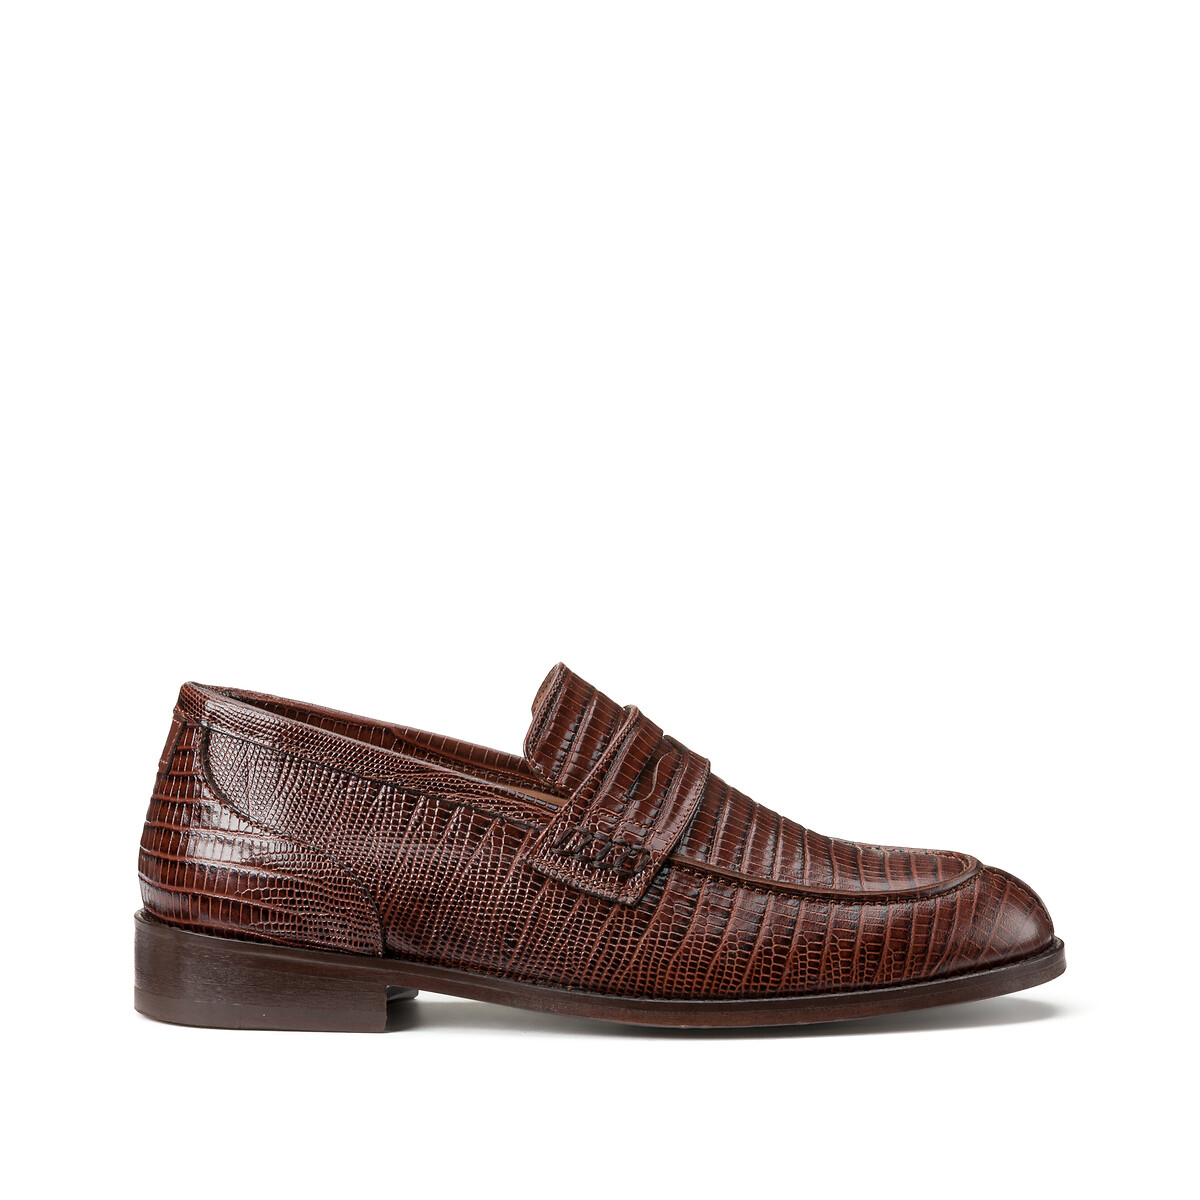 7490 Lizard Print Loafers in Leather